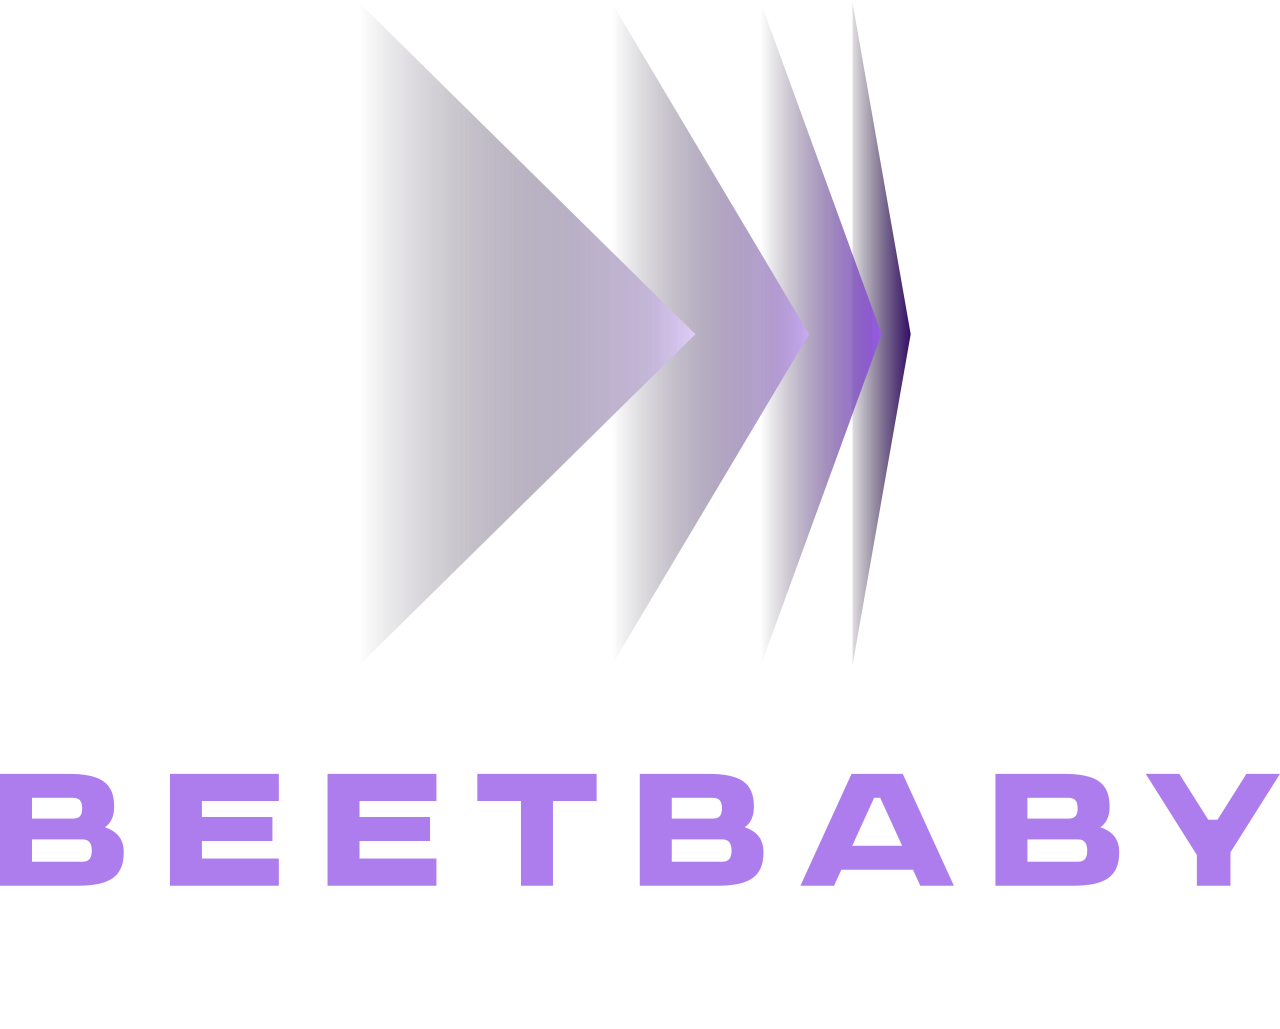 BeetBaby's logo